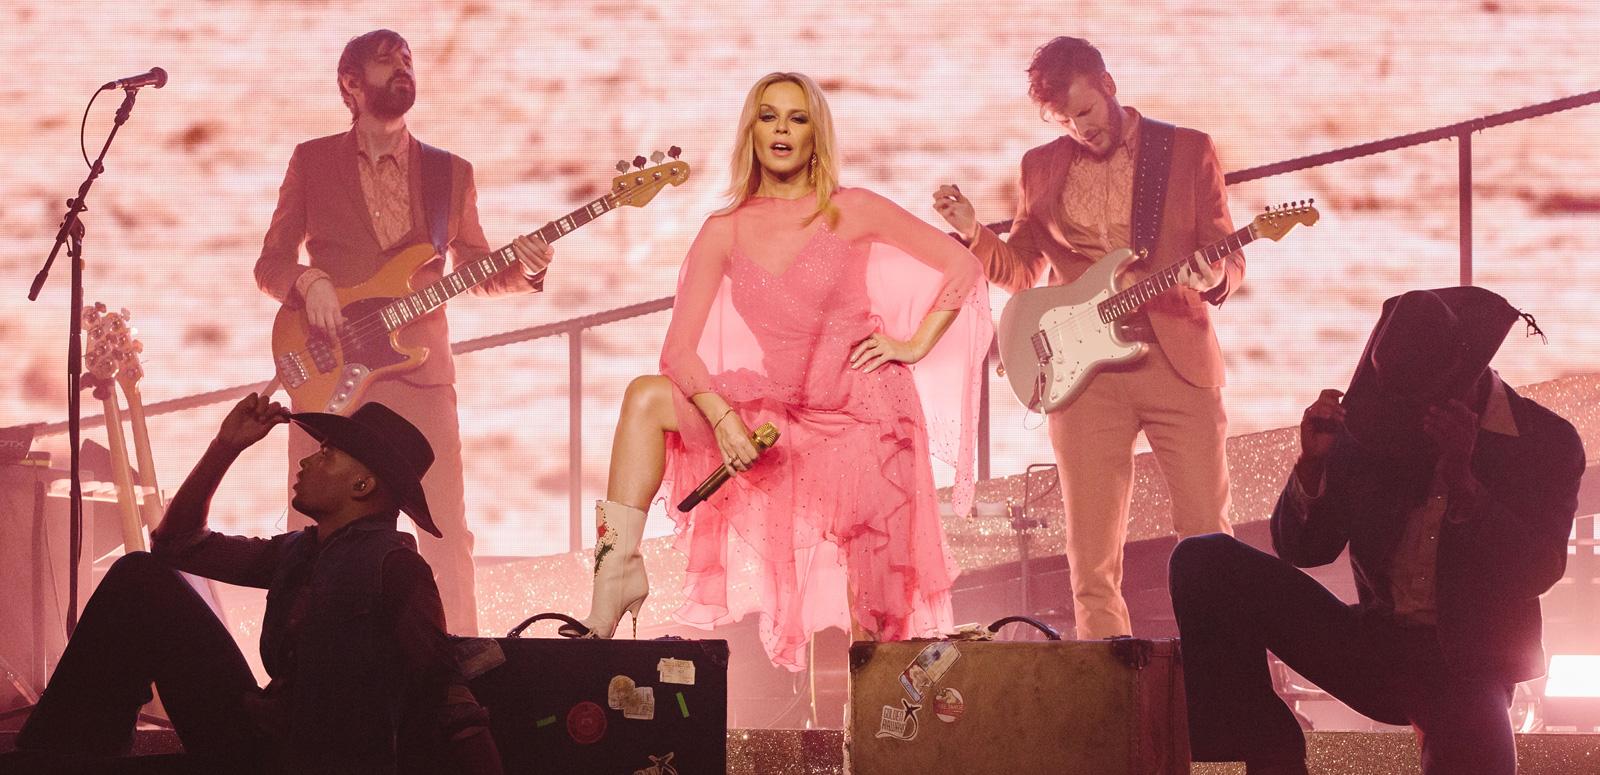 Kylie Minogue is standing on a stage with a foot up on an amplifier in a power pose. There are dancers in front of her and two musicians on stage with her playing guitar.